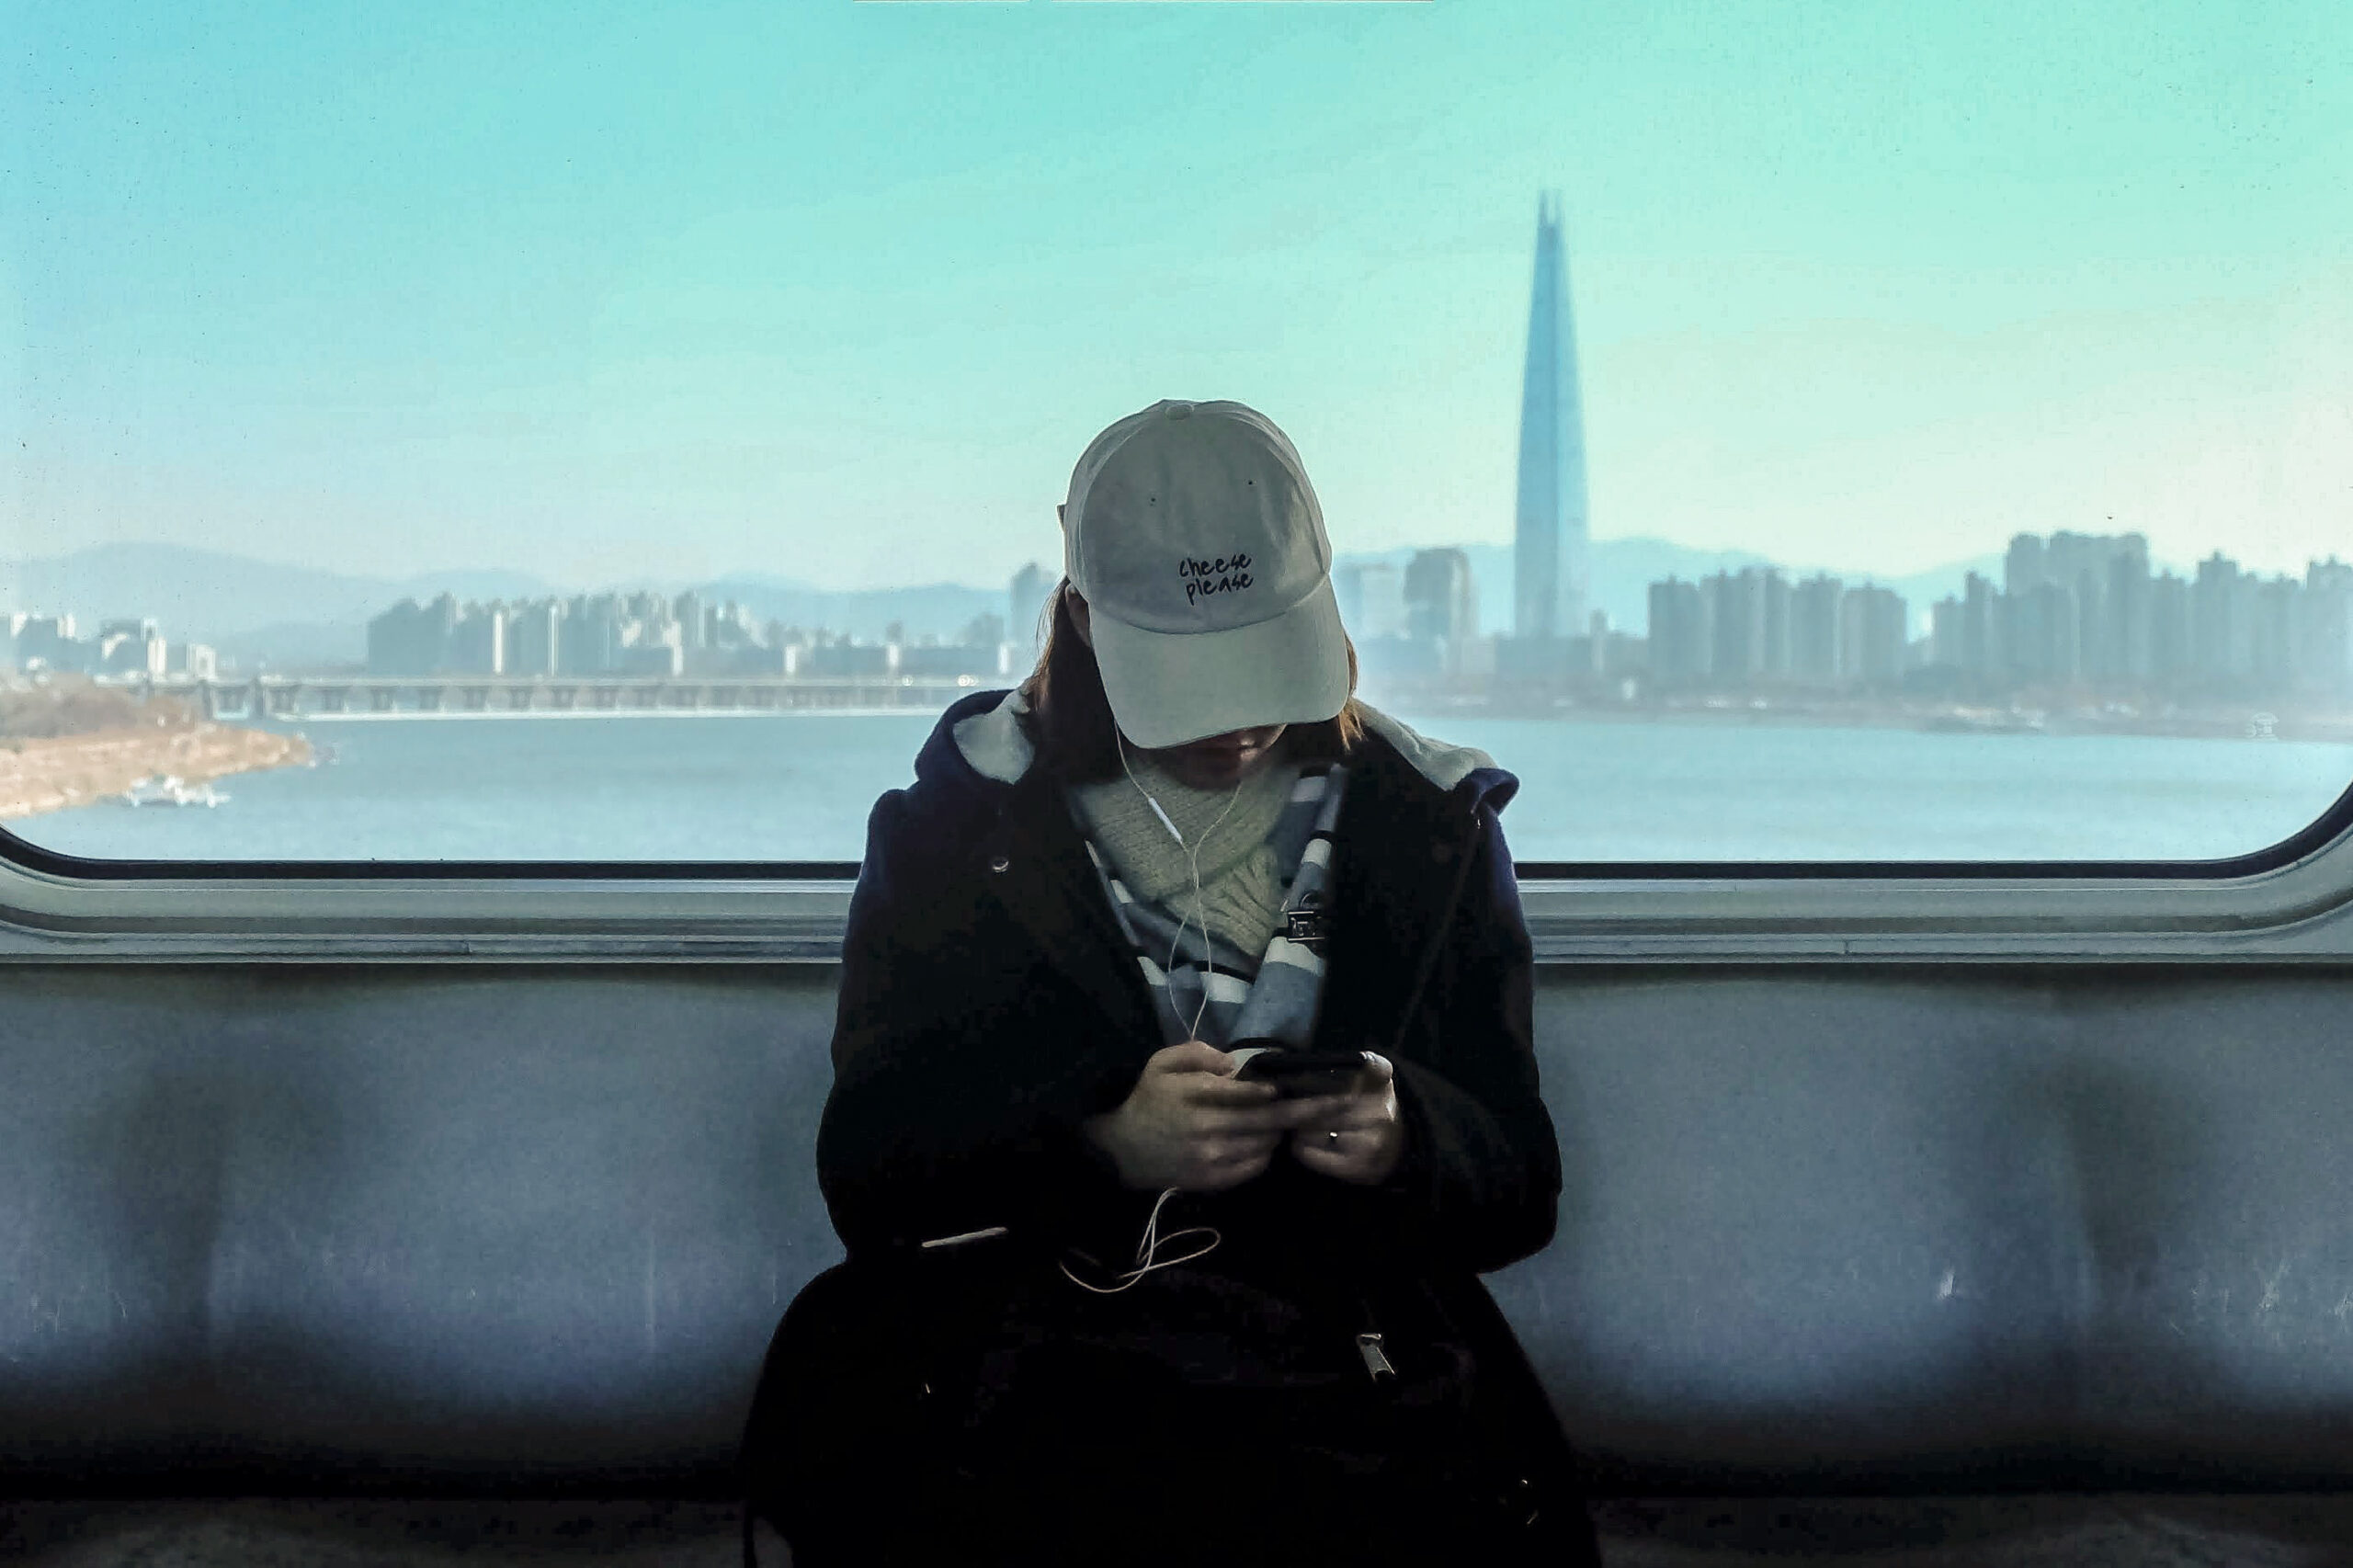 Student using smartphone on a train with the Seoul skyline in the background, showcasing everyday life in Korea.